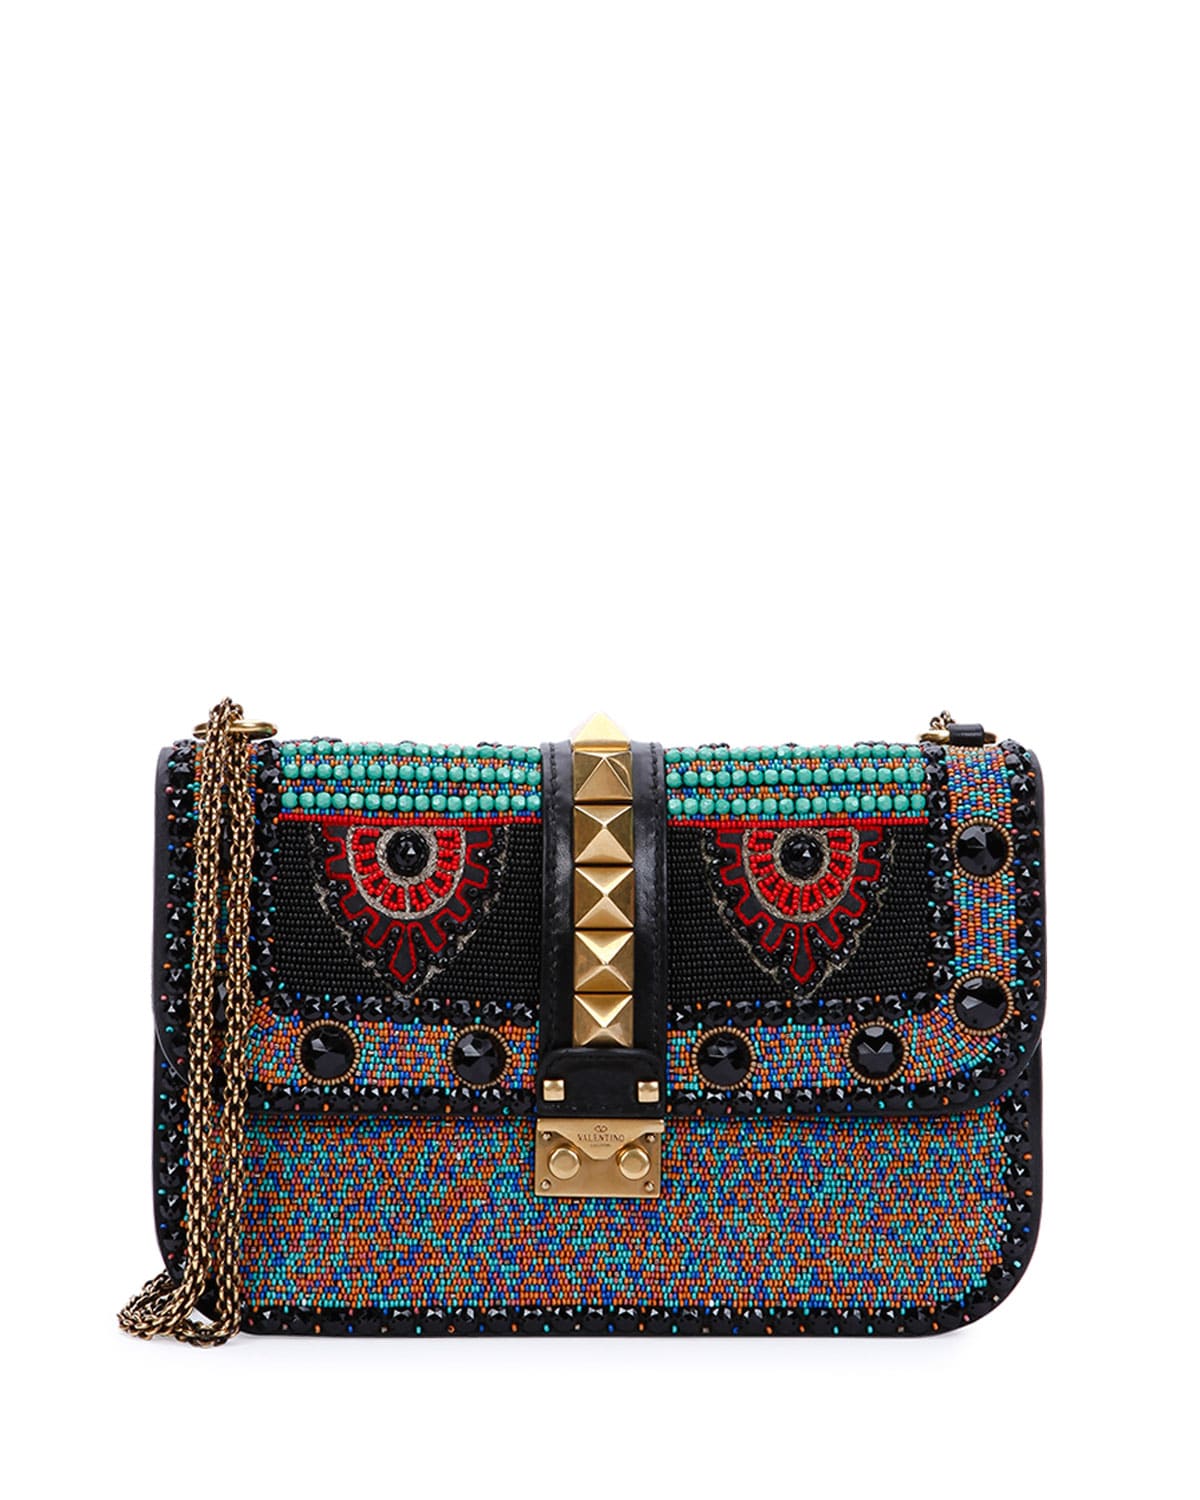 Valentino Spring/Summer 2016 Bag Collection - Spotted Fashion